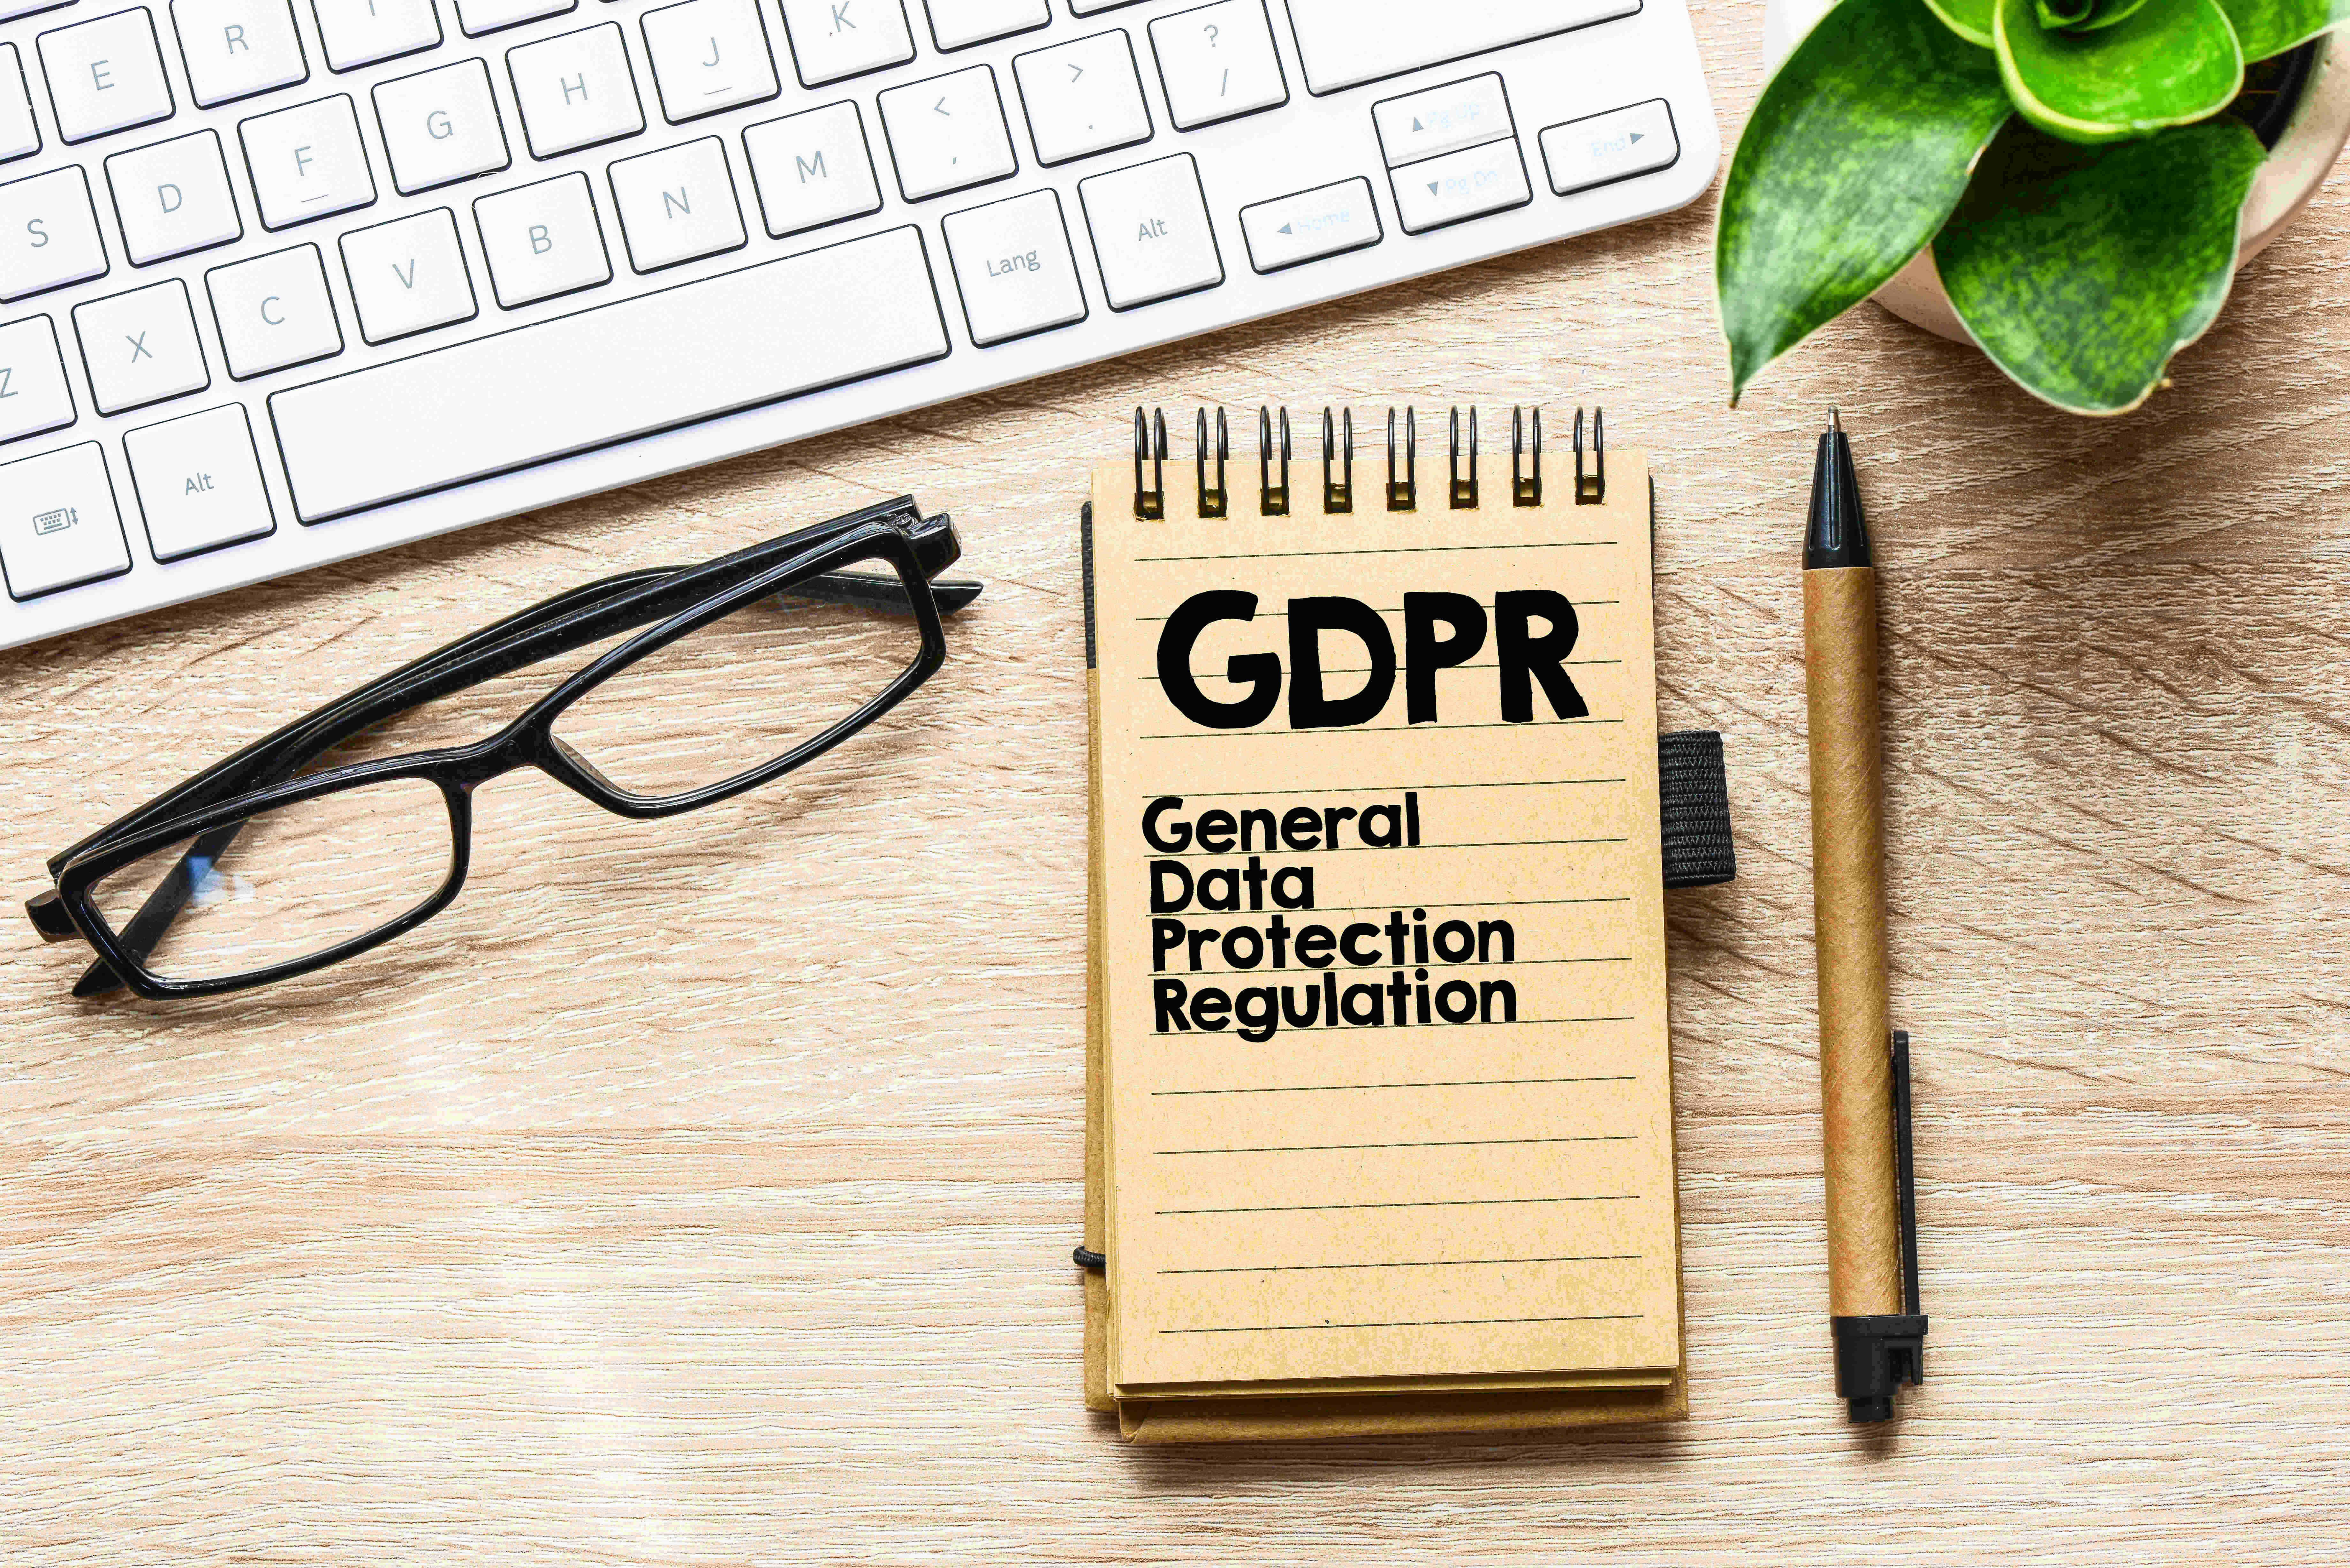 GDPR – What does this mean for me as a UAE business?